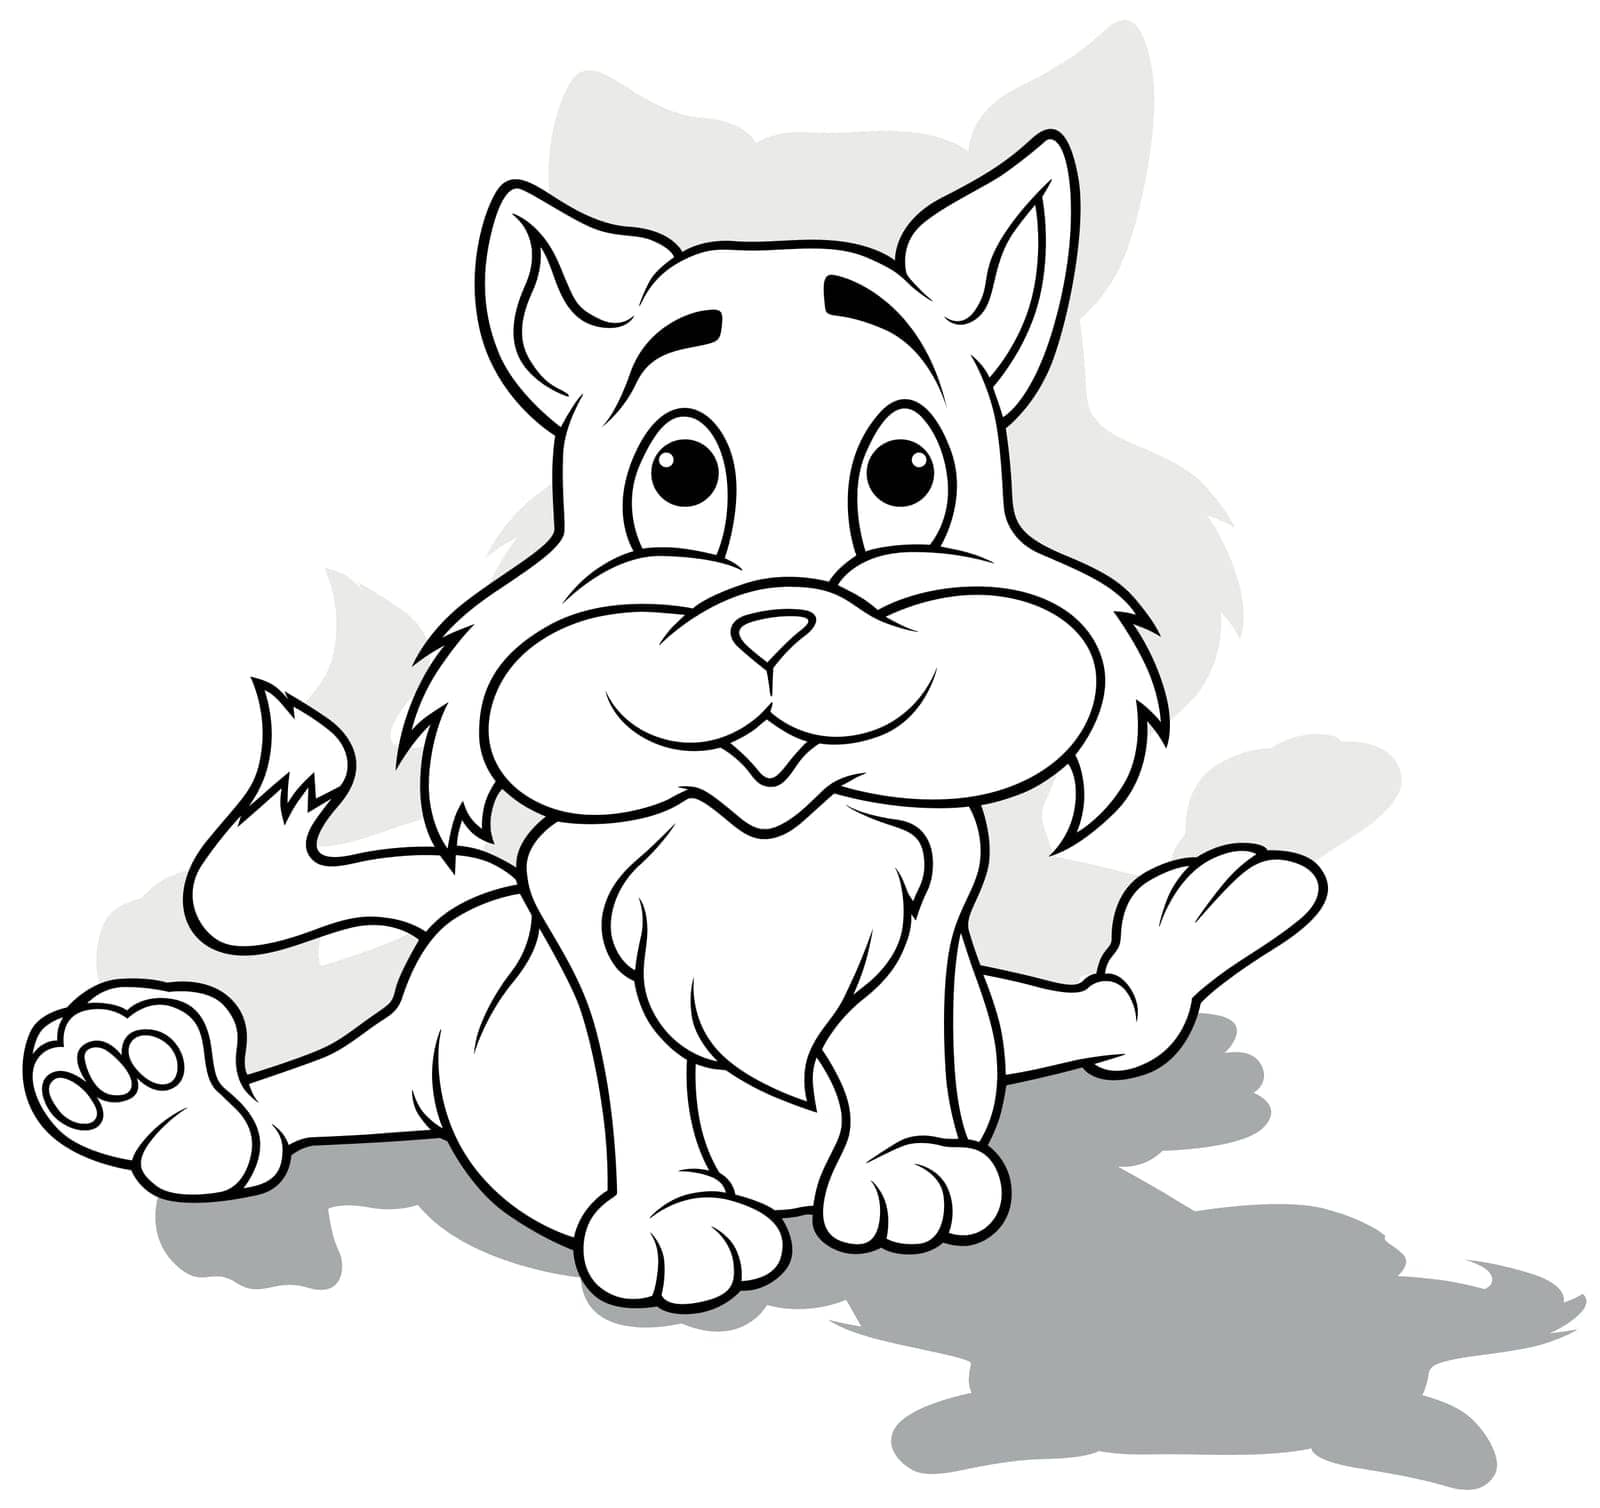 Drawing of a Cute Sitting Kitty from Front View - Cartoon Illustration Isolated on White Background, Vector